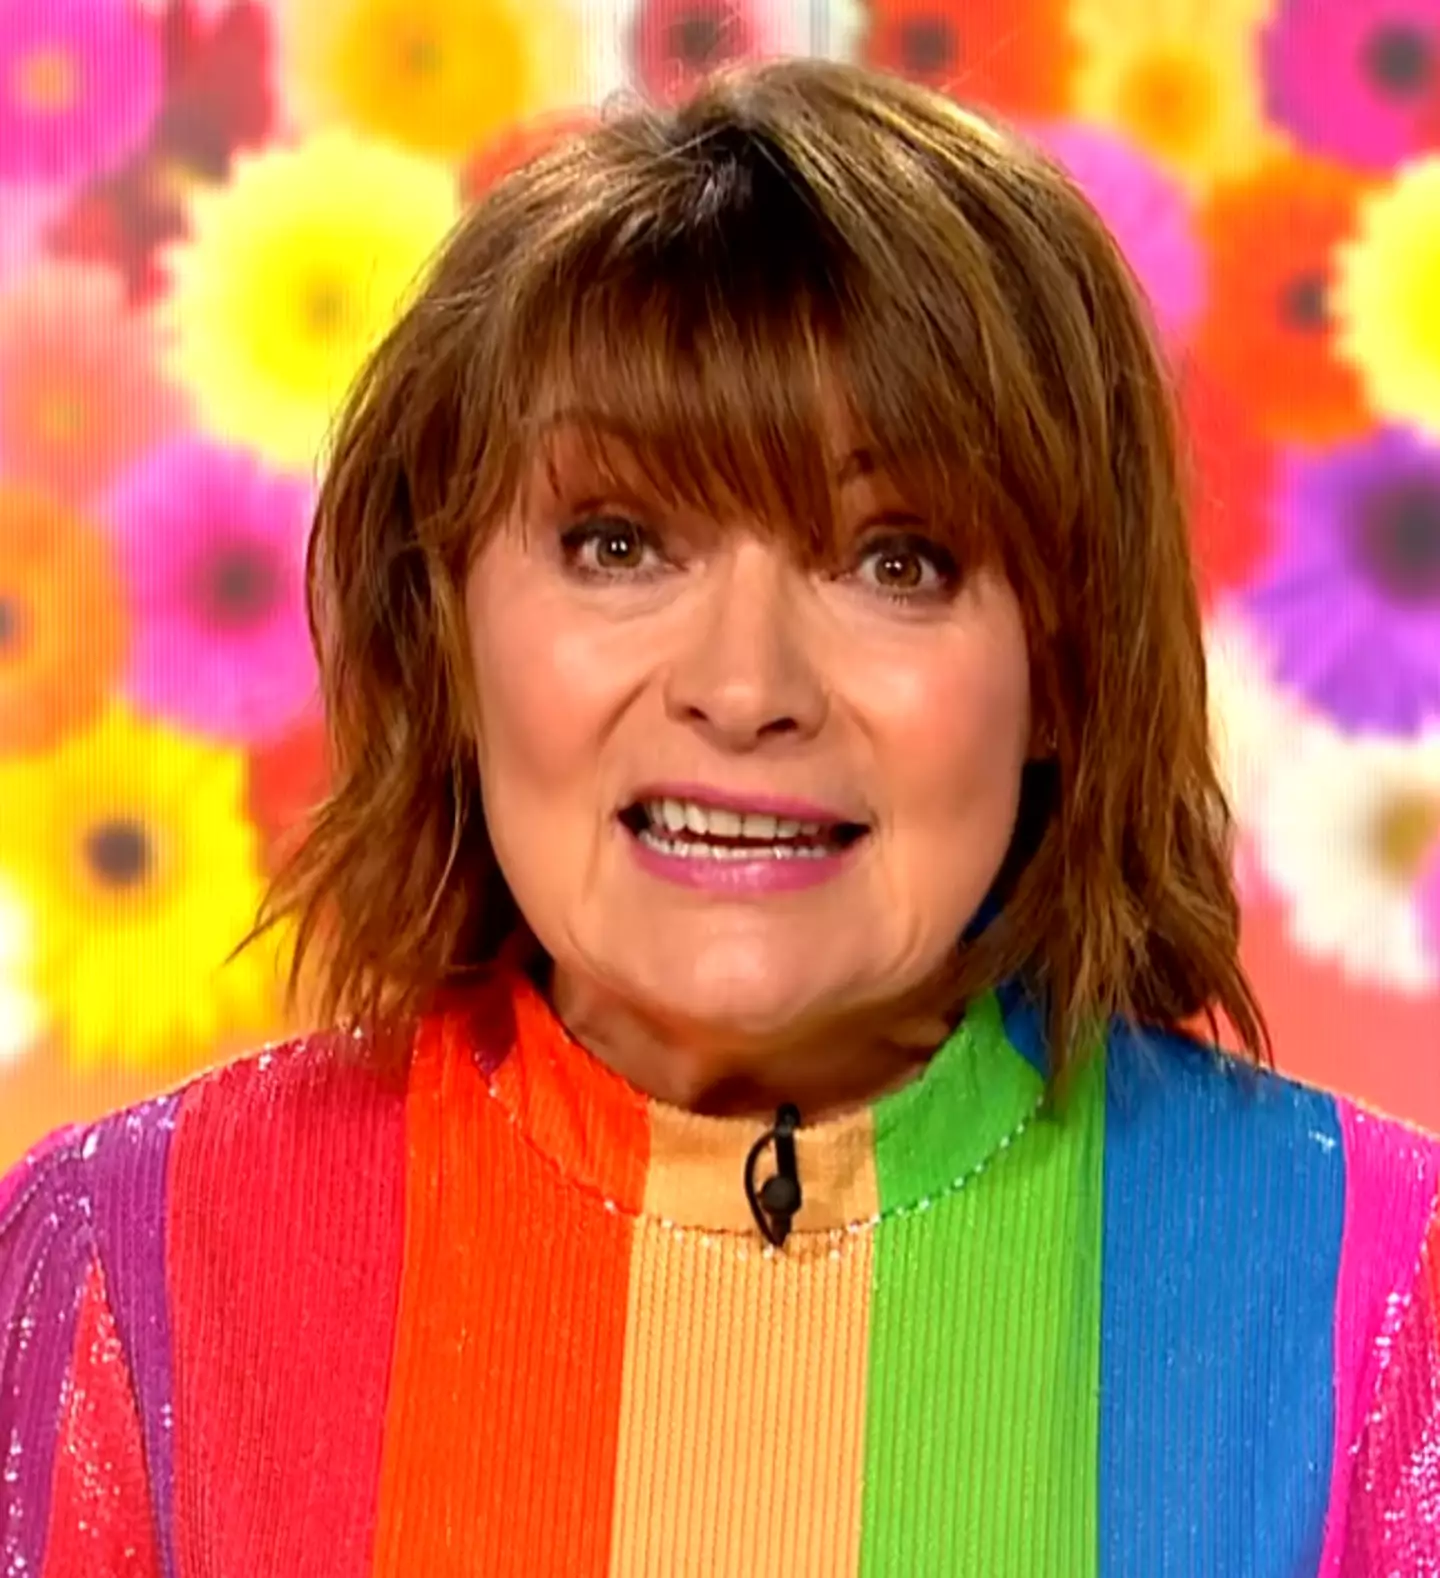 Lorraine Kelly's appearances on her show have come under scrutiny (Instagram/@lorrainekellysmith)